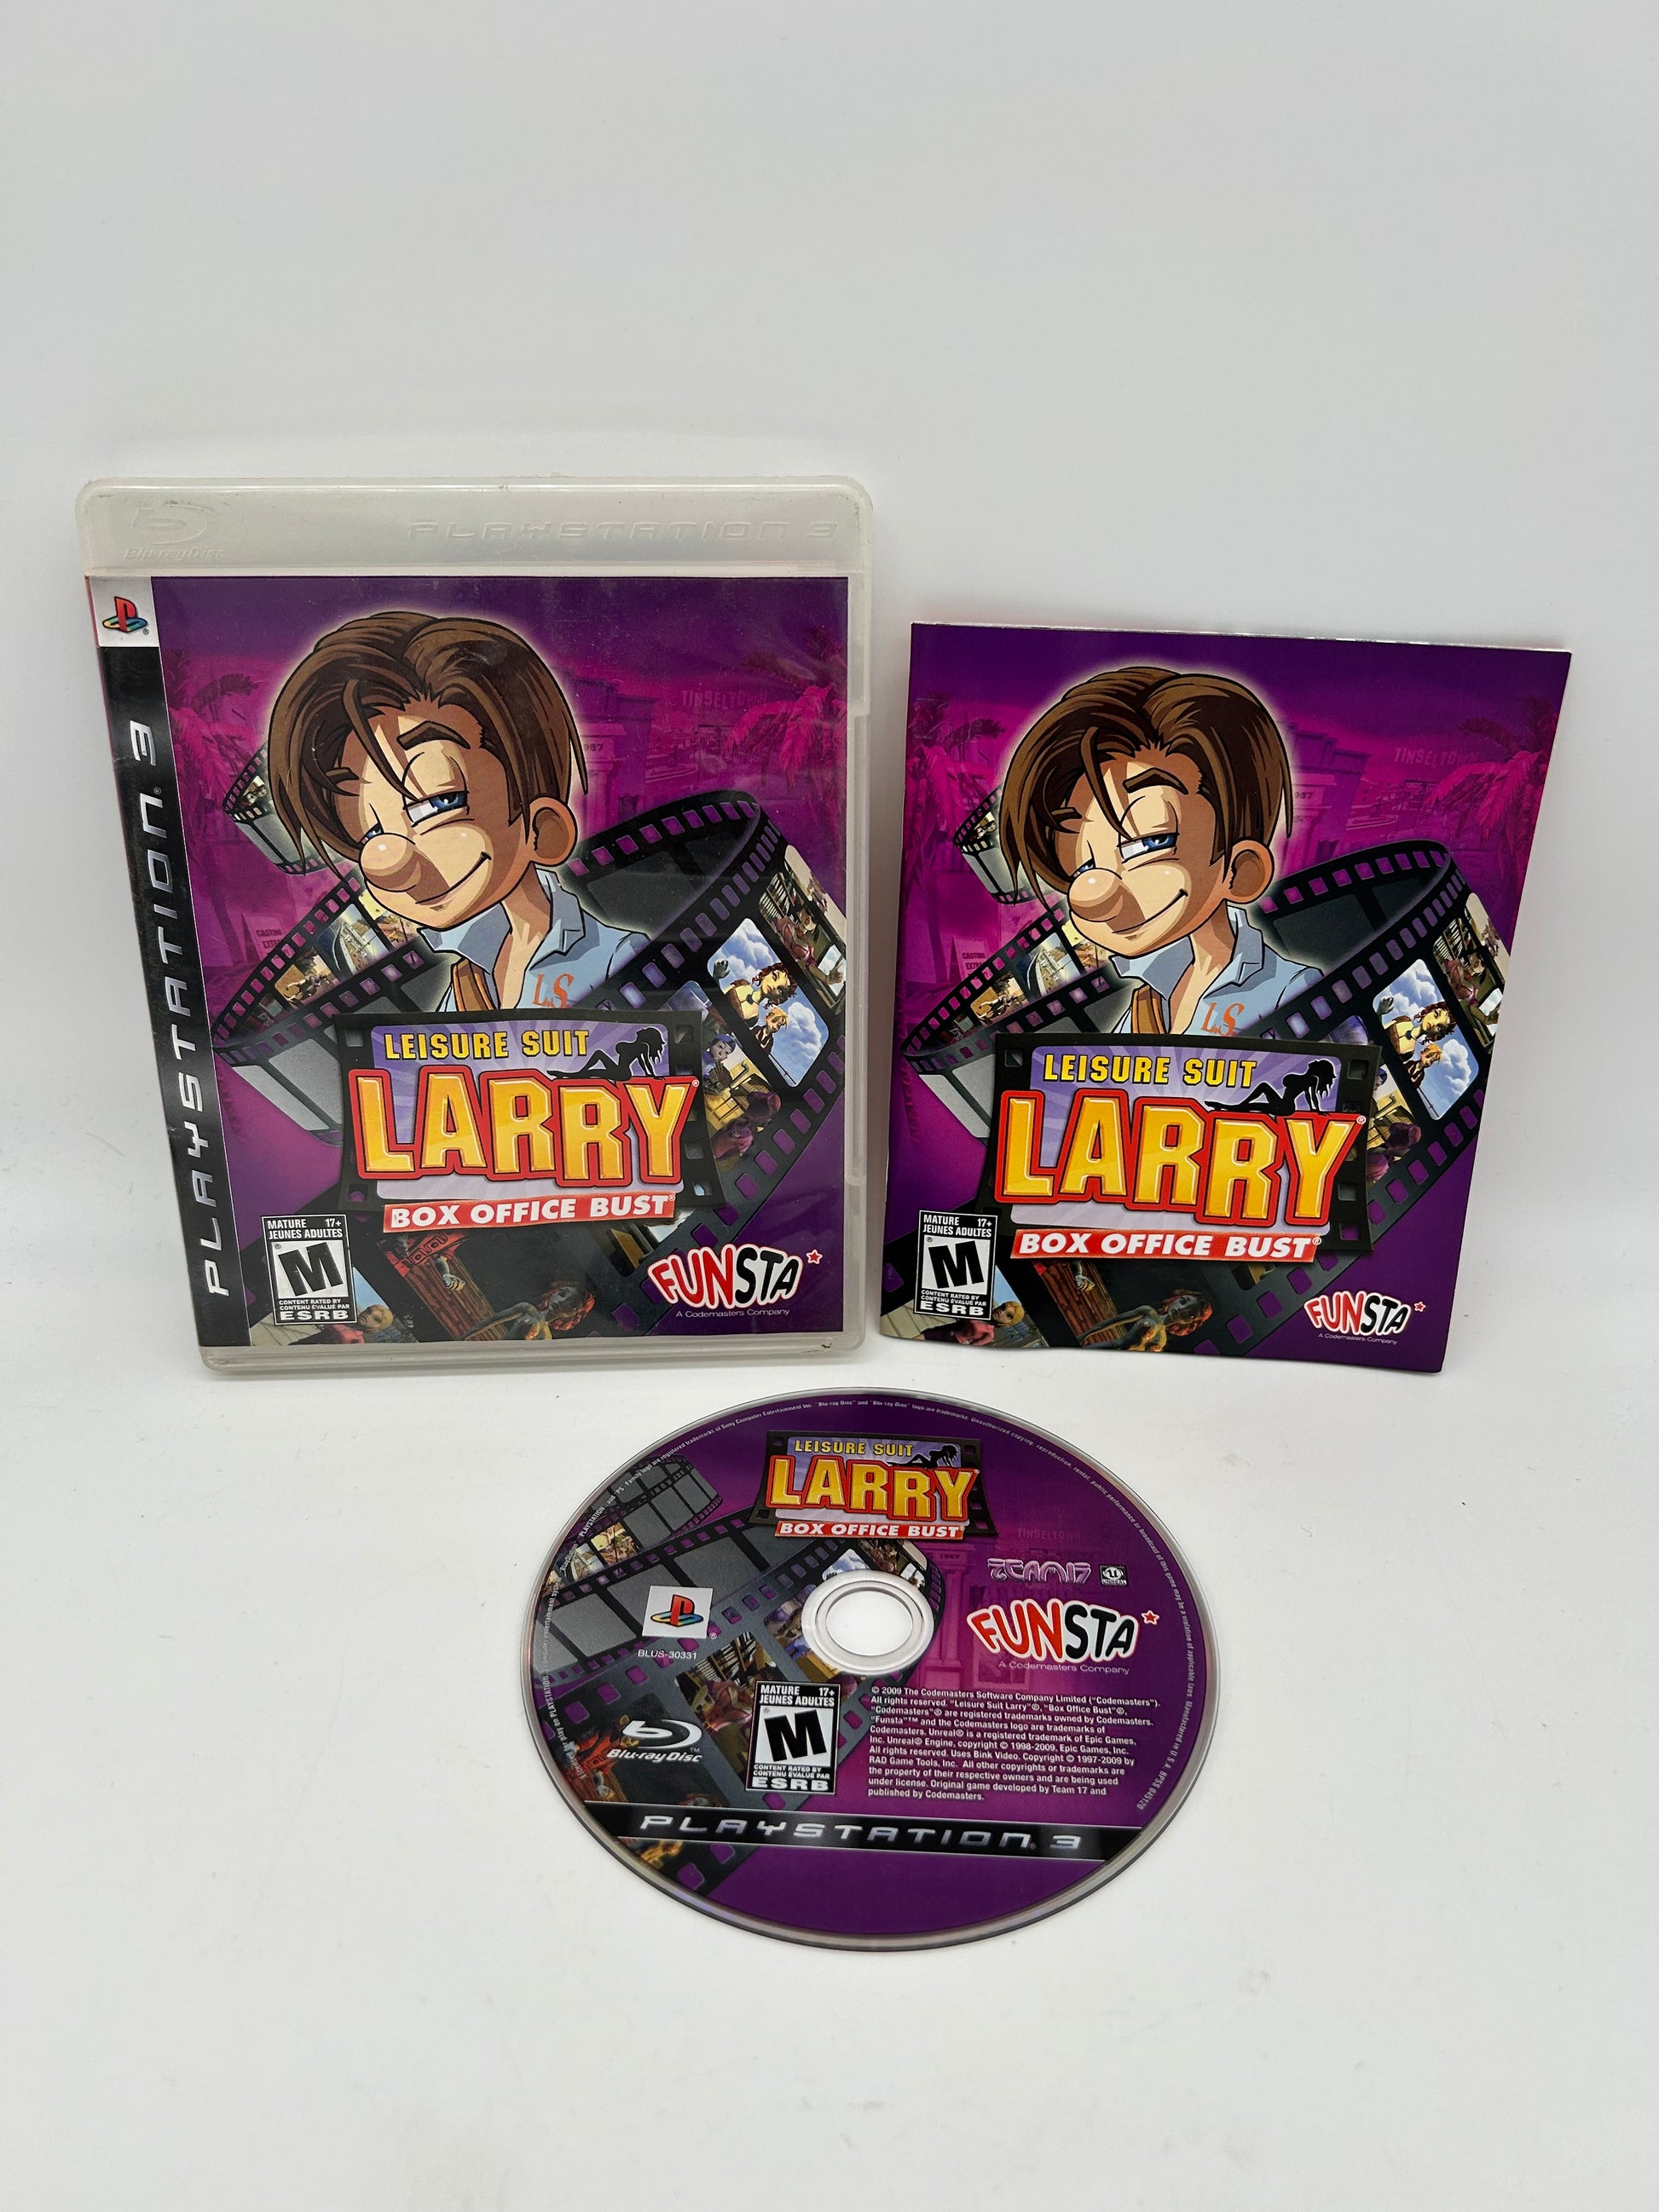 PiXEL-RETRO.COM : SONY PLAYSTATION 3 (PS3) COMPLET CIB BOX MANUAL GAME NTSC LEISURE SUIT LARRY BOX OFFICE BUST